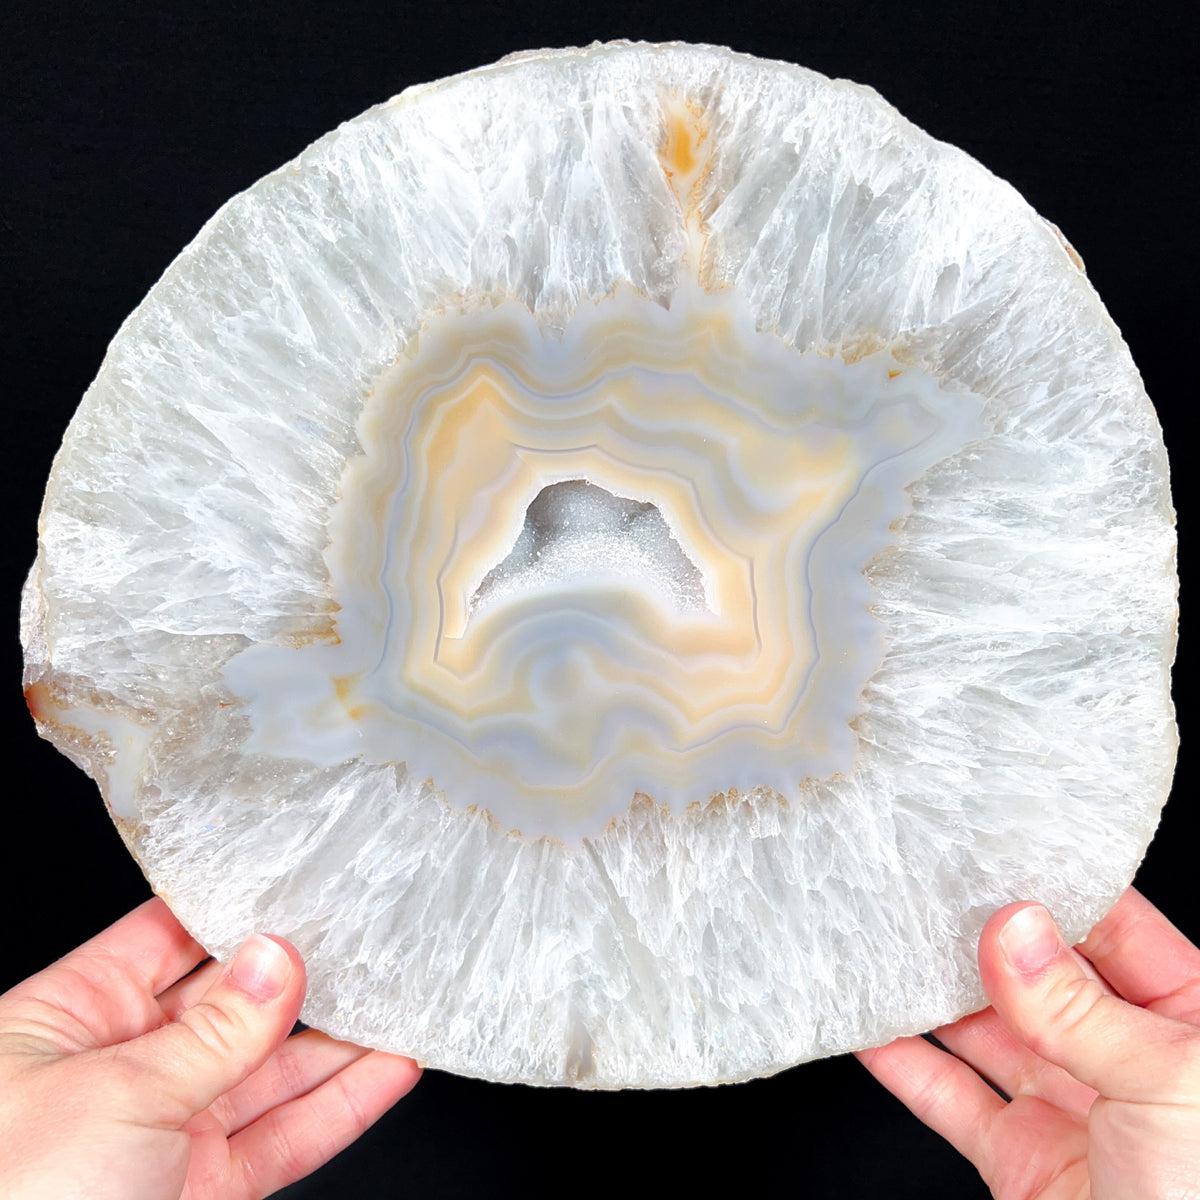 Large Agate Geode Thick Cut Slab with Drusy Quartz Center